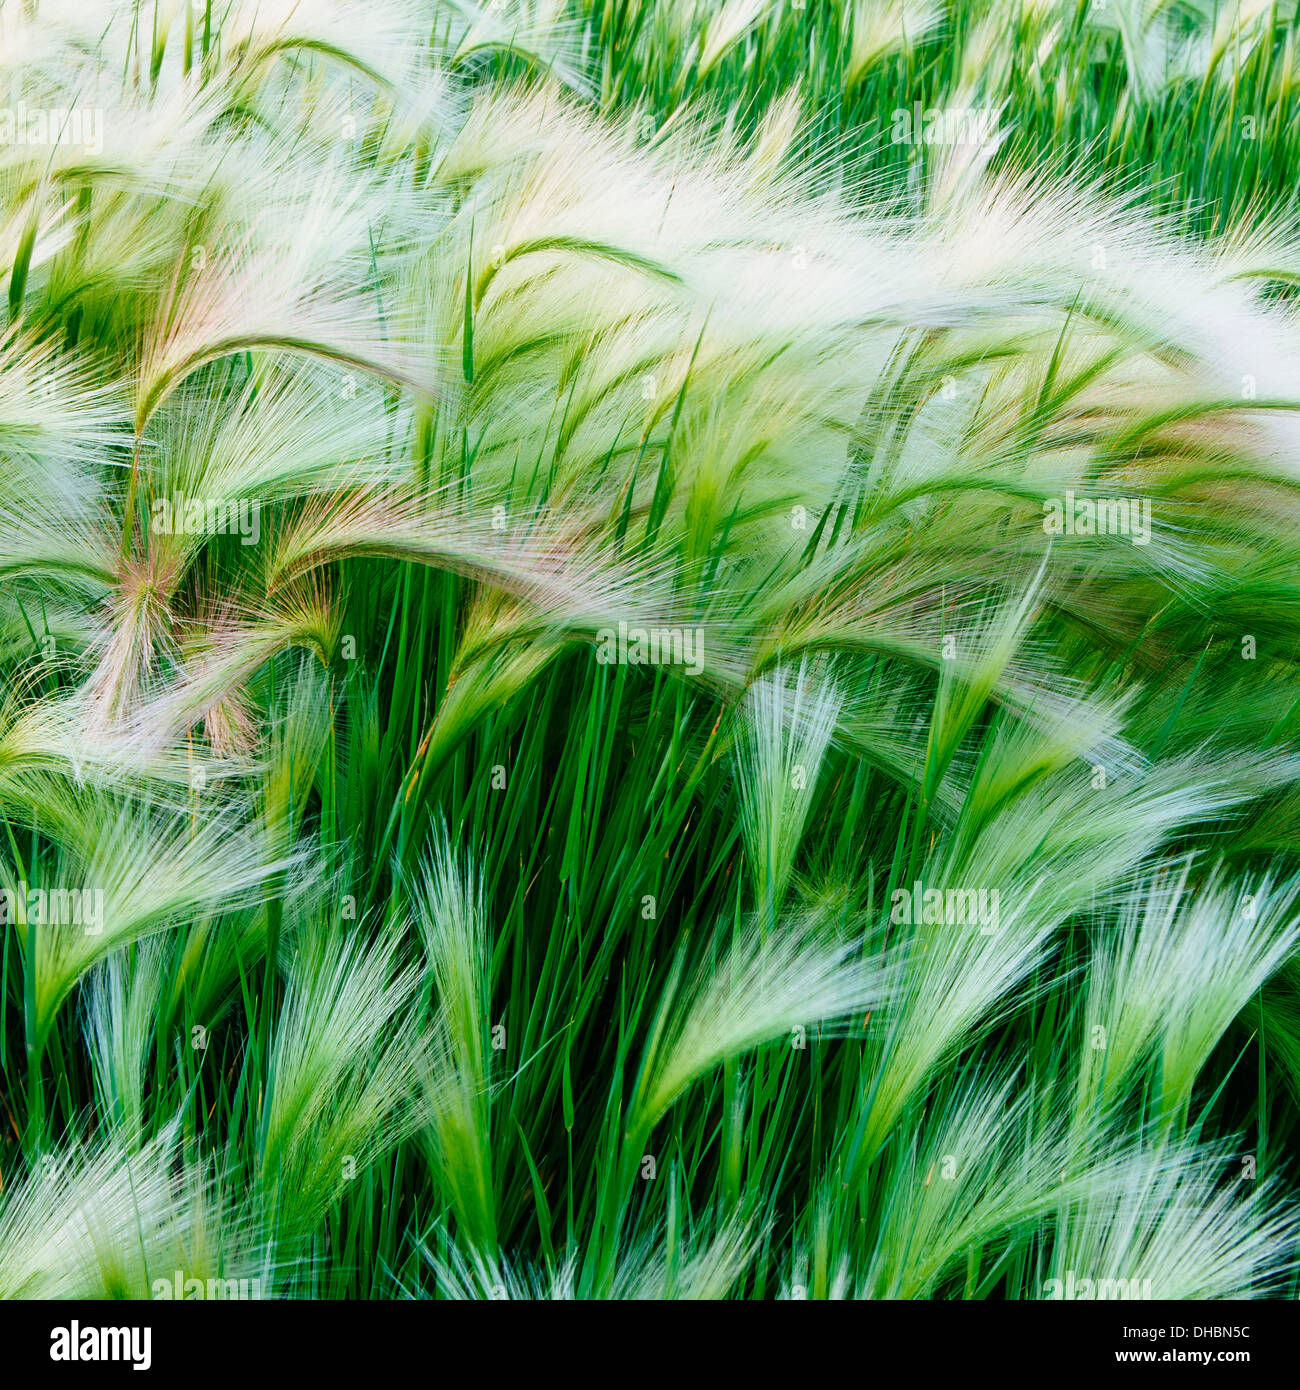 Green grasses blowing in the wind, in Glacier national park. Stock Photo